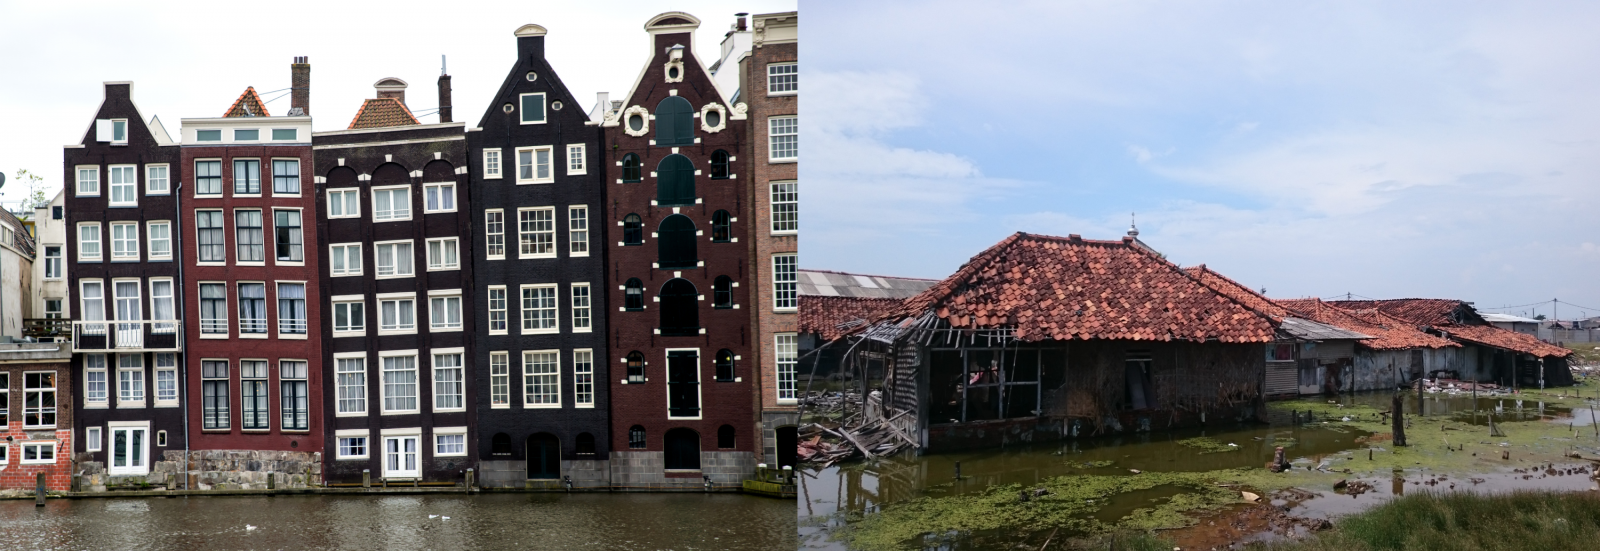 Photos of damage on houses in Amsterdam and Jakarta